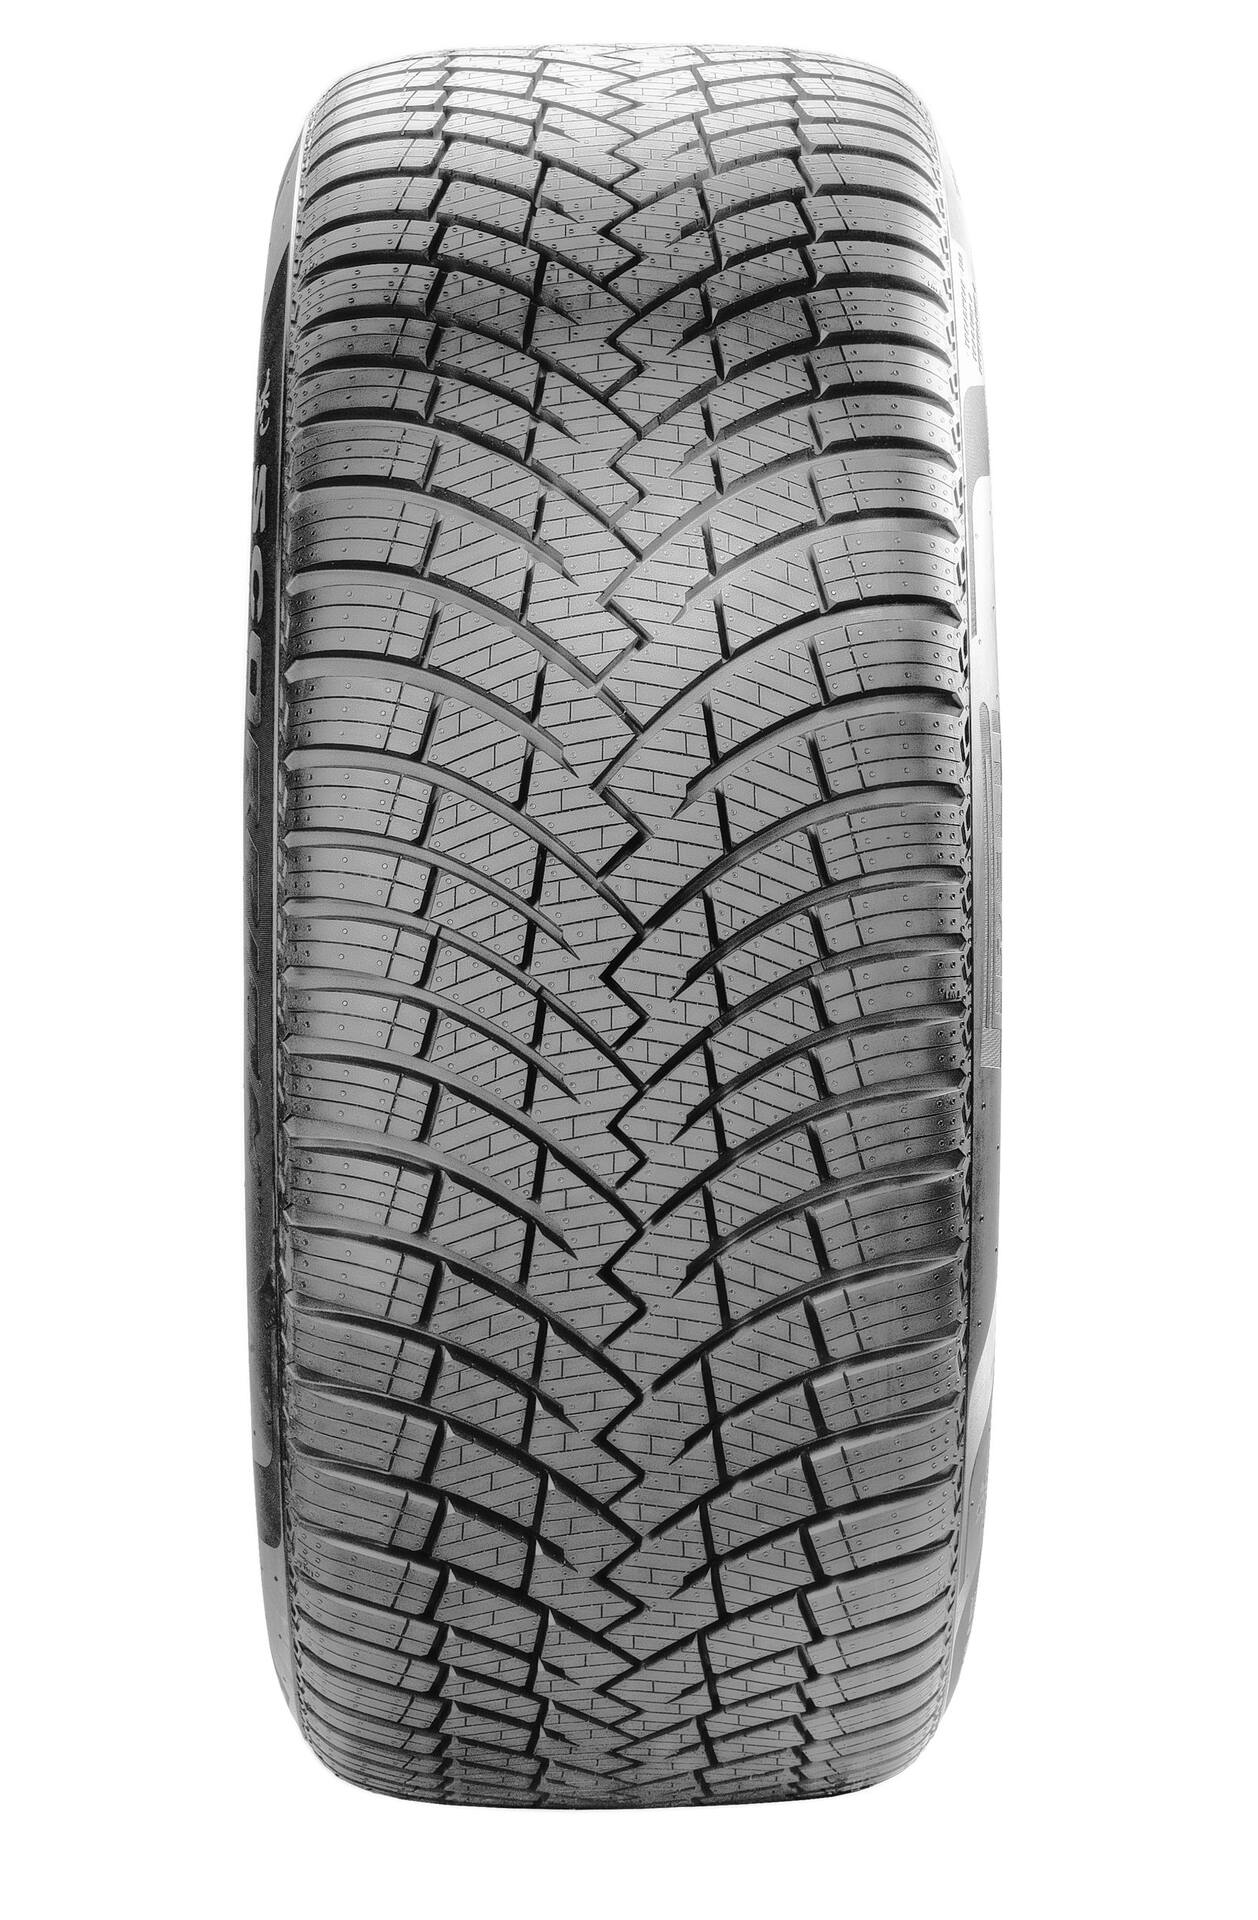 Pirelli Scorpion™ WeatherActive™ All-Weather Tires for Light